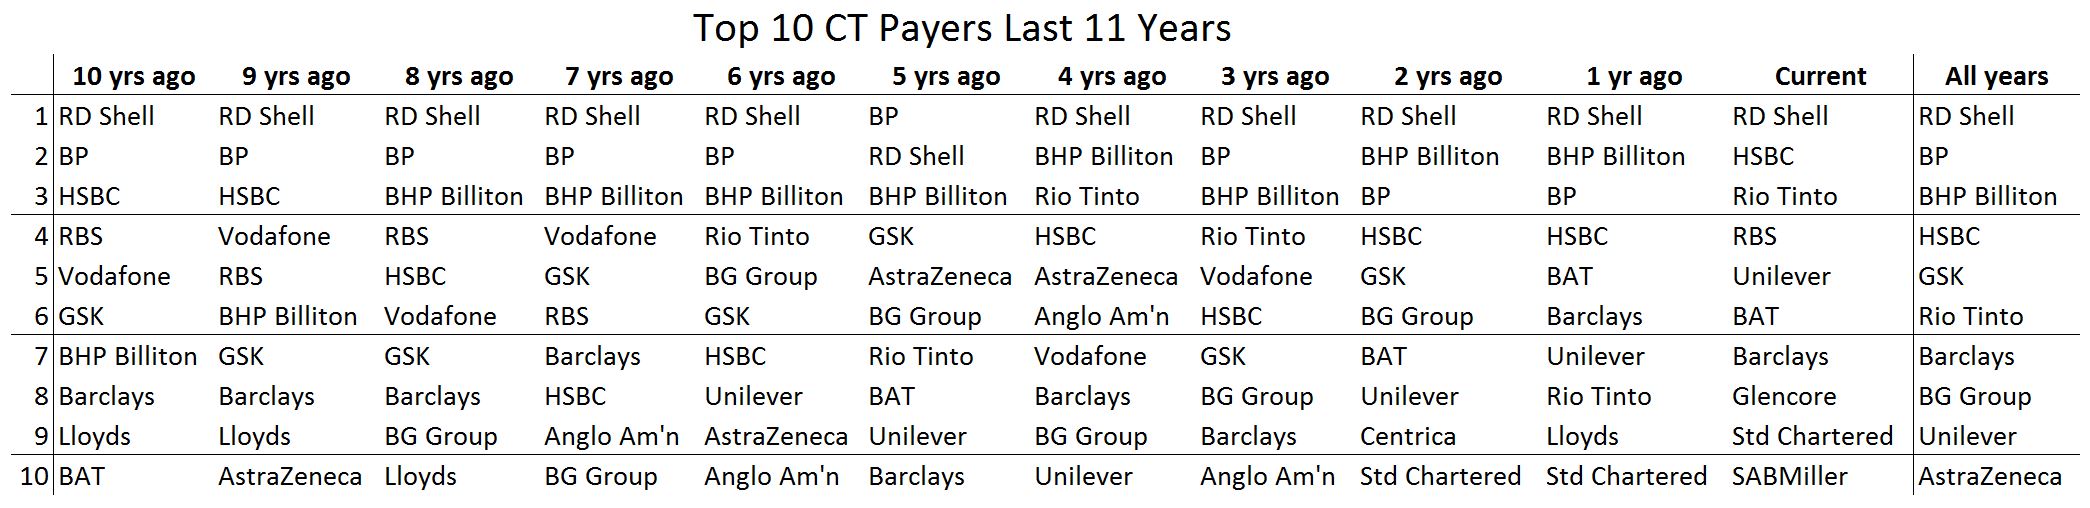 Top 10 CT payers Last 11 Years 1508